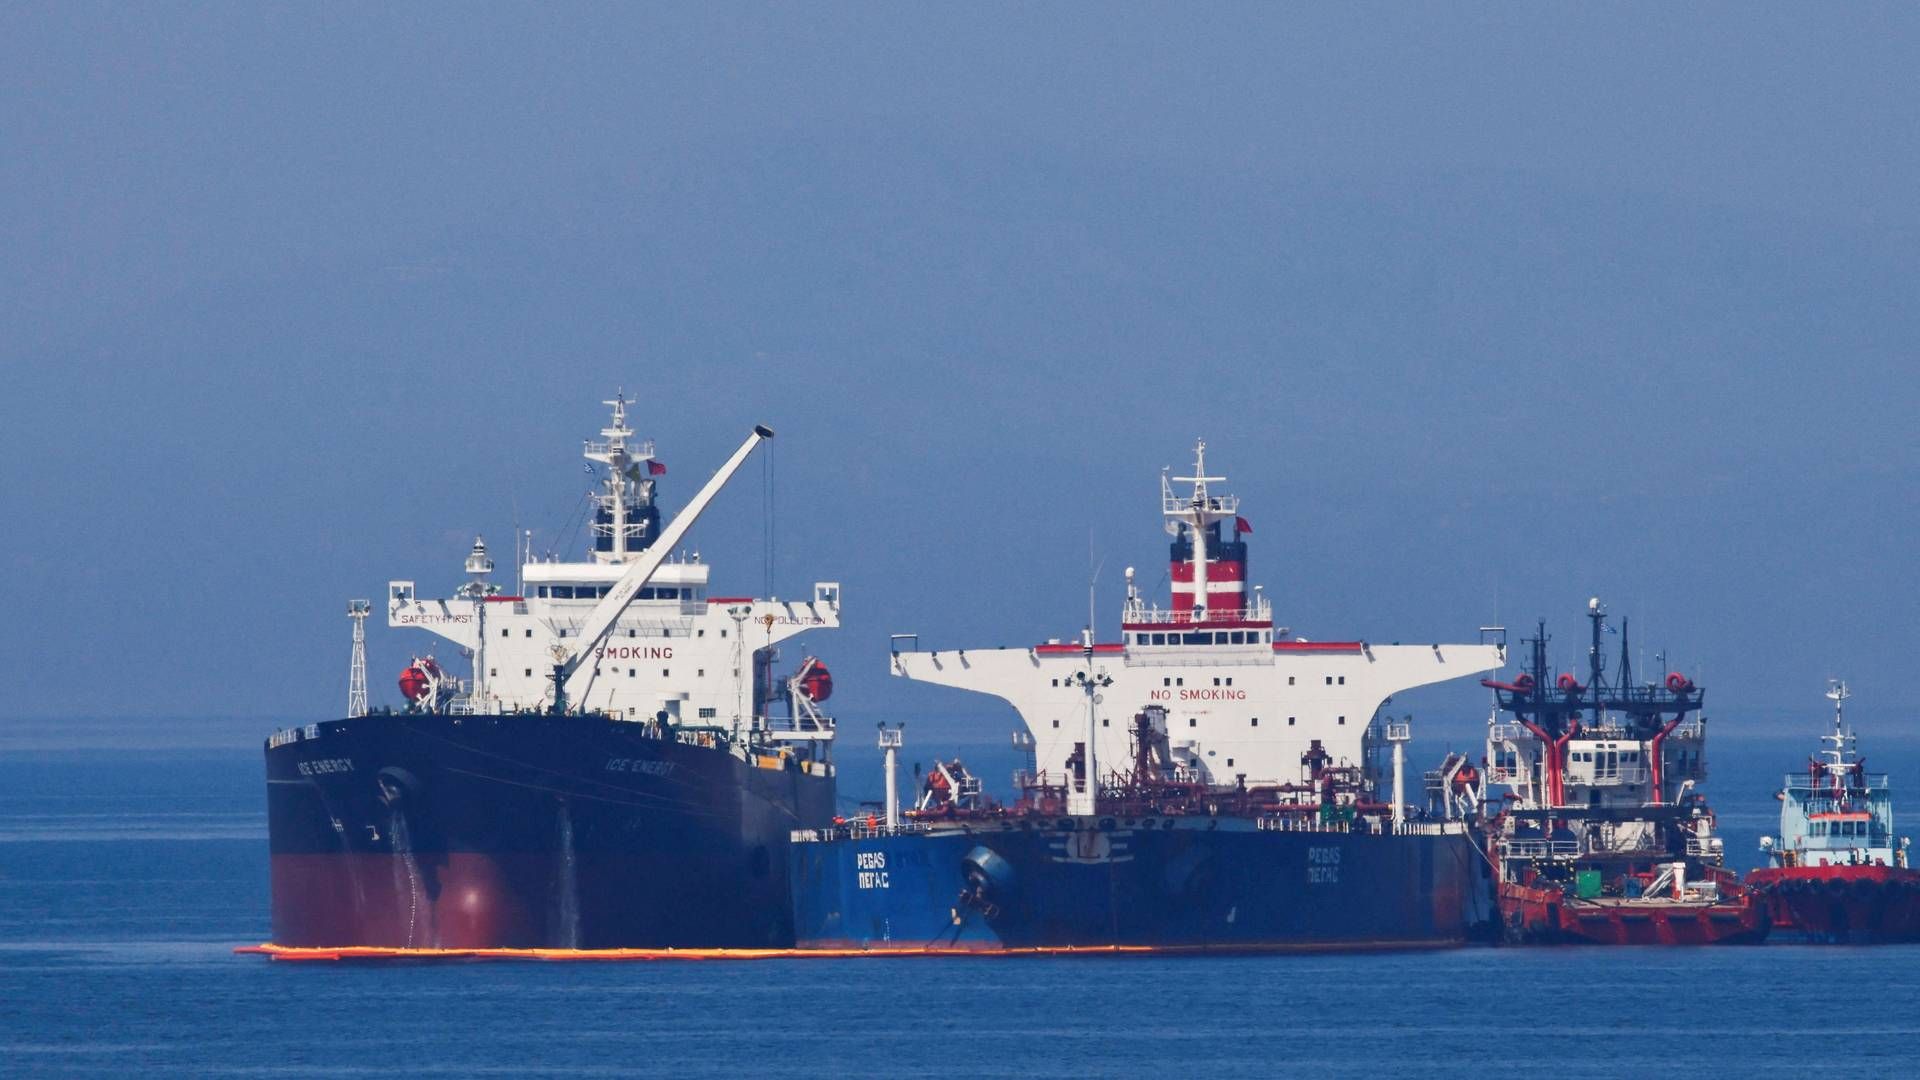 The ships in the image are not the sanctioned tankers. The image shows Lebanese-flagged vessel Ice Energy transferring oil to Iranian tanker Lana. | Photo: Costas Baltas/Reuters/Ritzau Scanpix